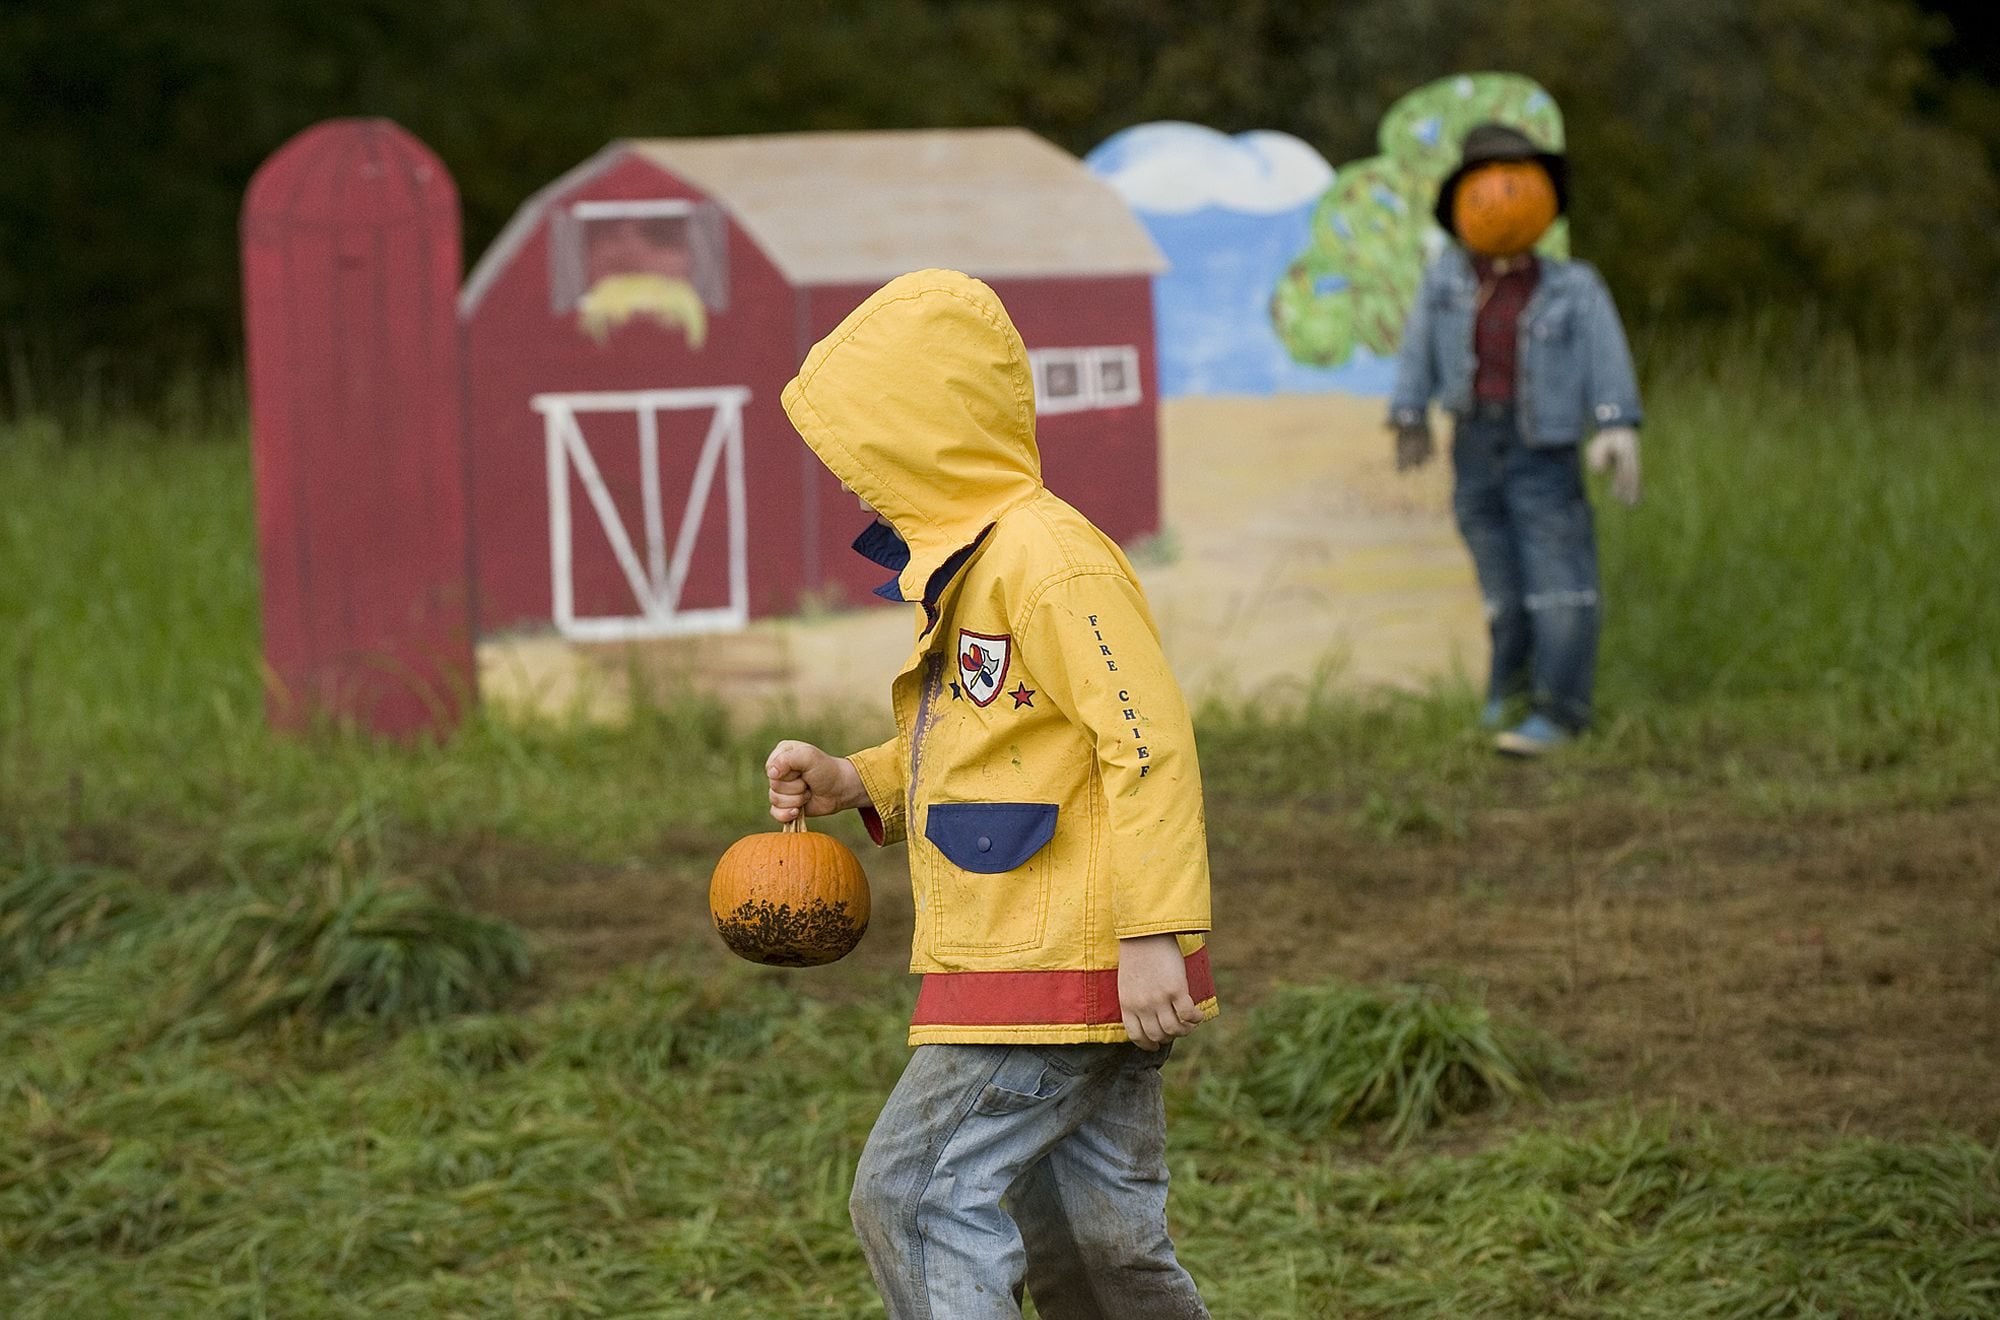 Branden Faline of Yacolt searches for the perfect pumpkin at Pomeroy Farm in 2010.